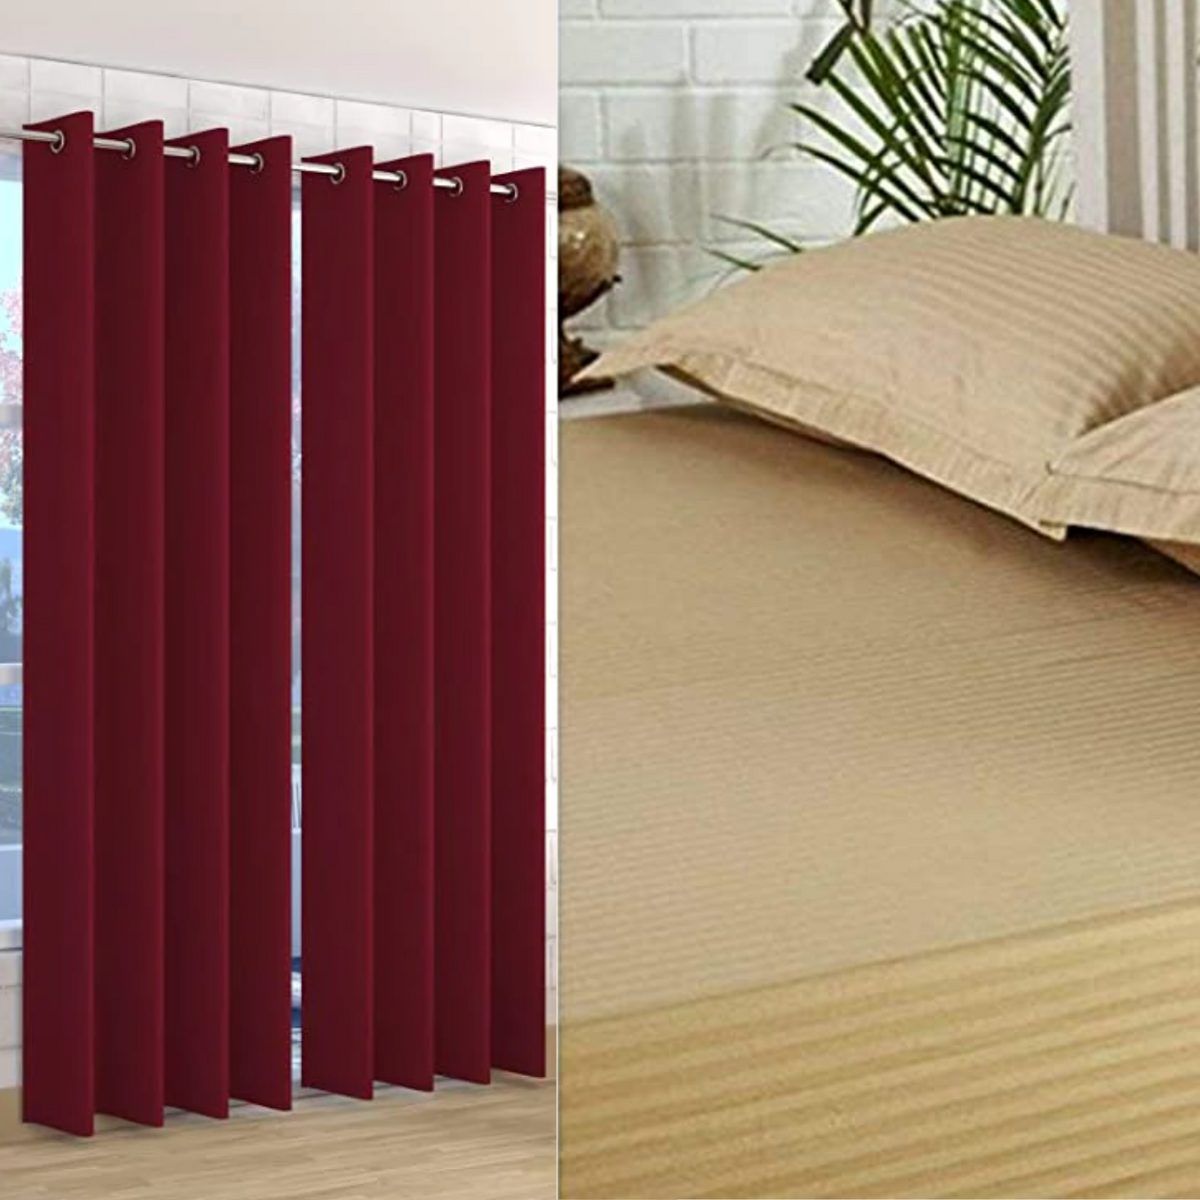 Double Bed Bedsheet + 9 Feet Curtain Combo